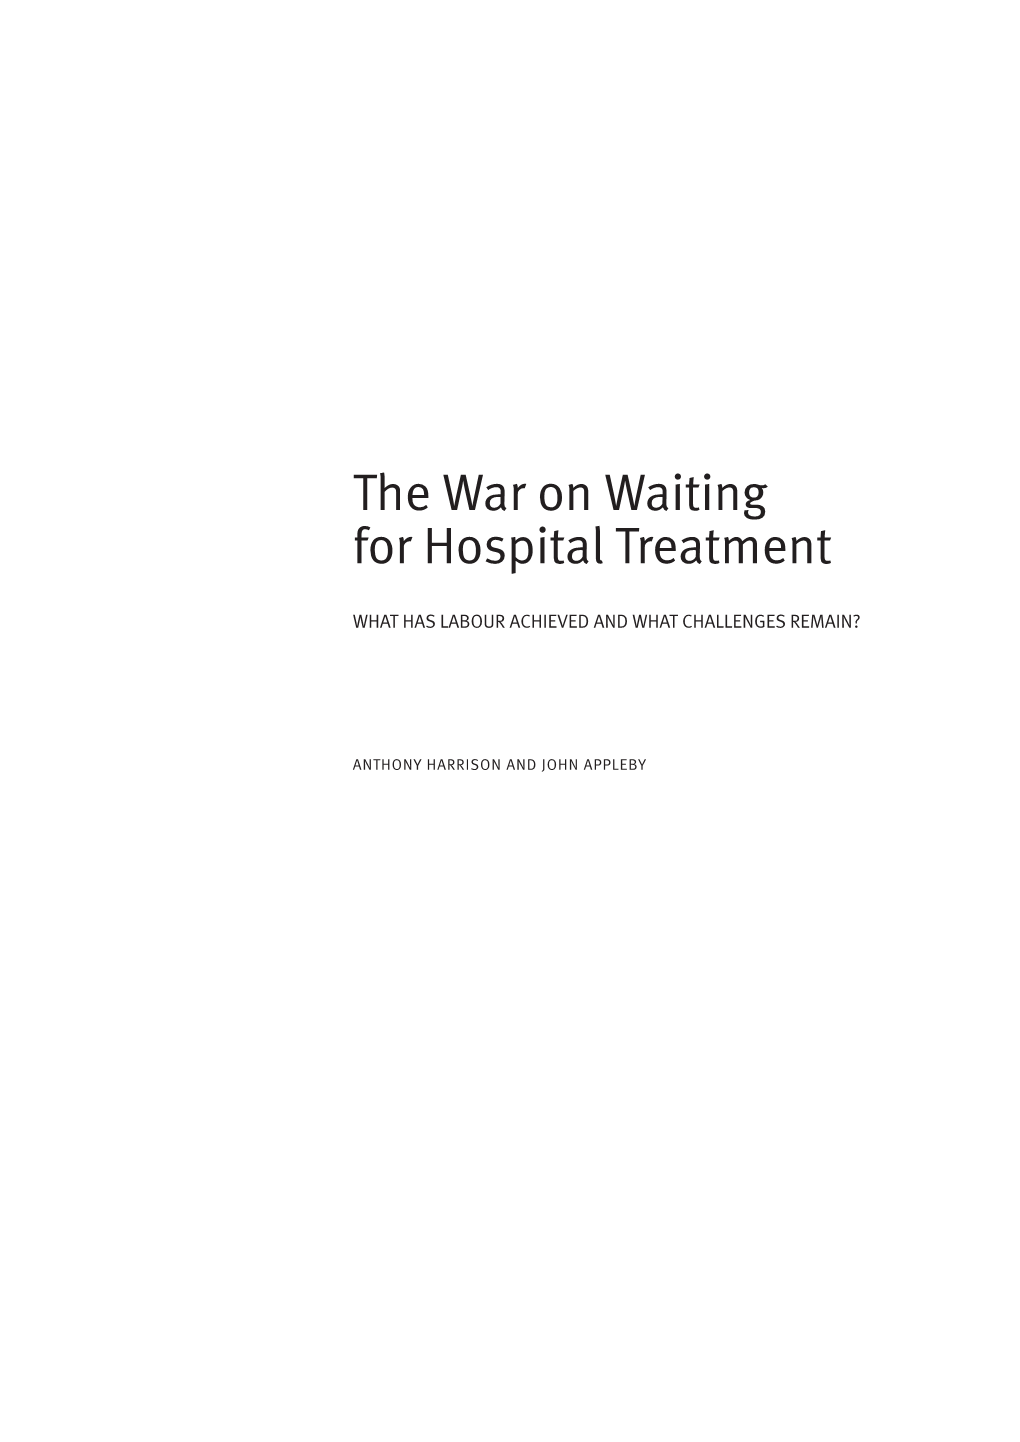 The War on Waiting for Hospital Treatment: What Has Labour Achieved and What Challenges Remain?